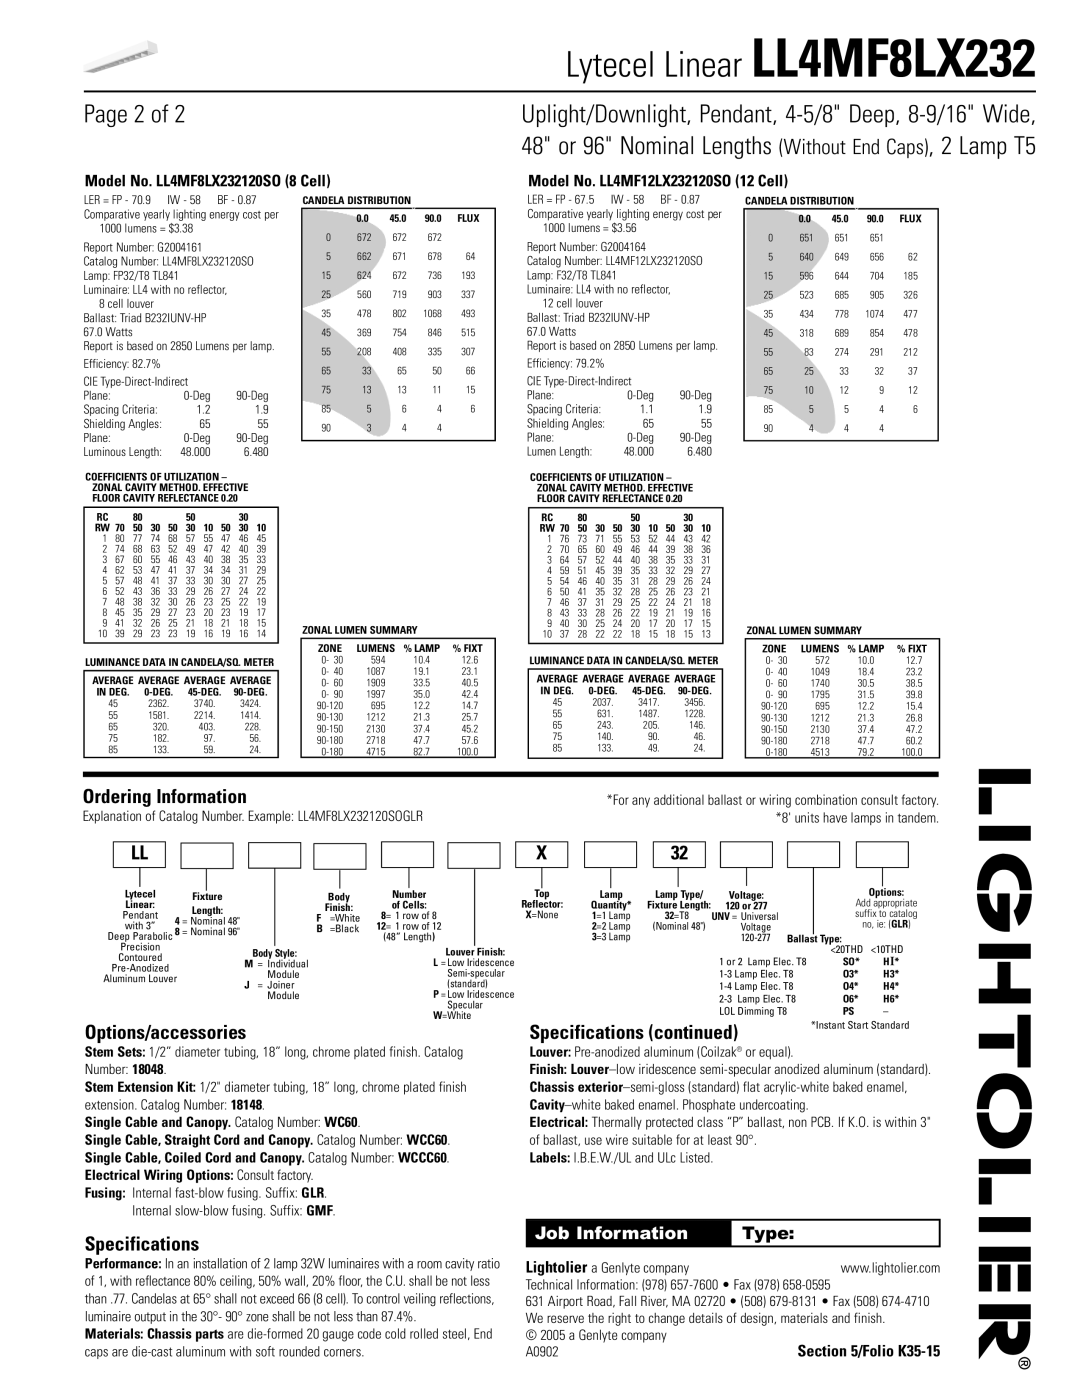 Lightolier LL4MF8LX232 Page 2 of, Ordering Information, Options/accessories, Specifications continued, Job Information 